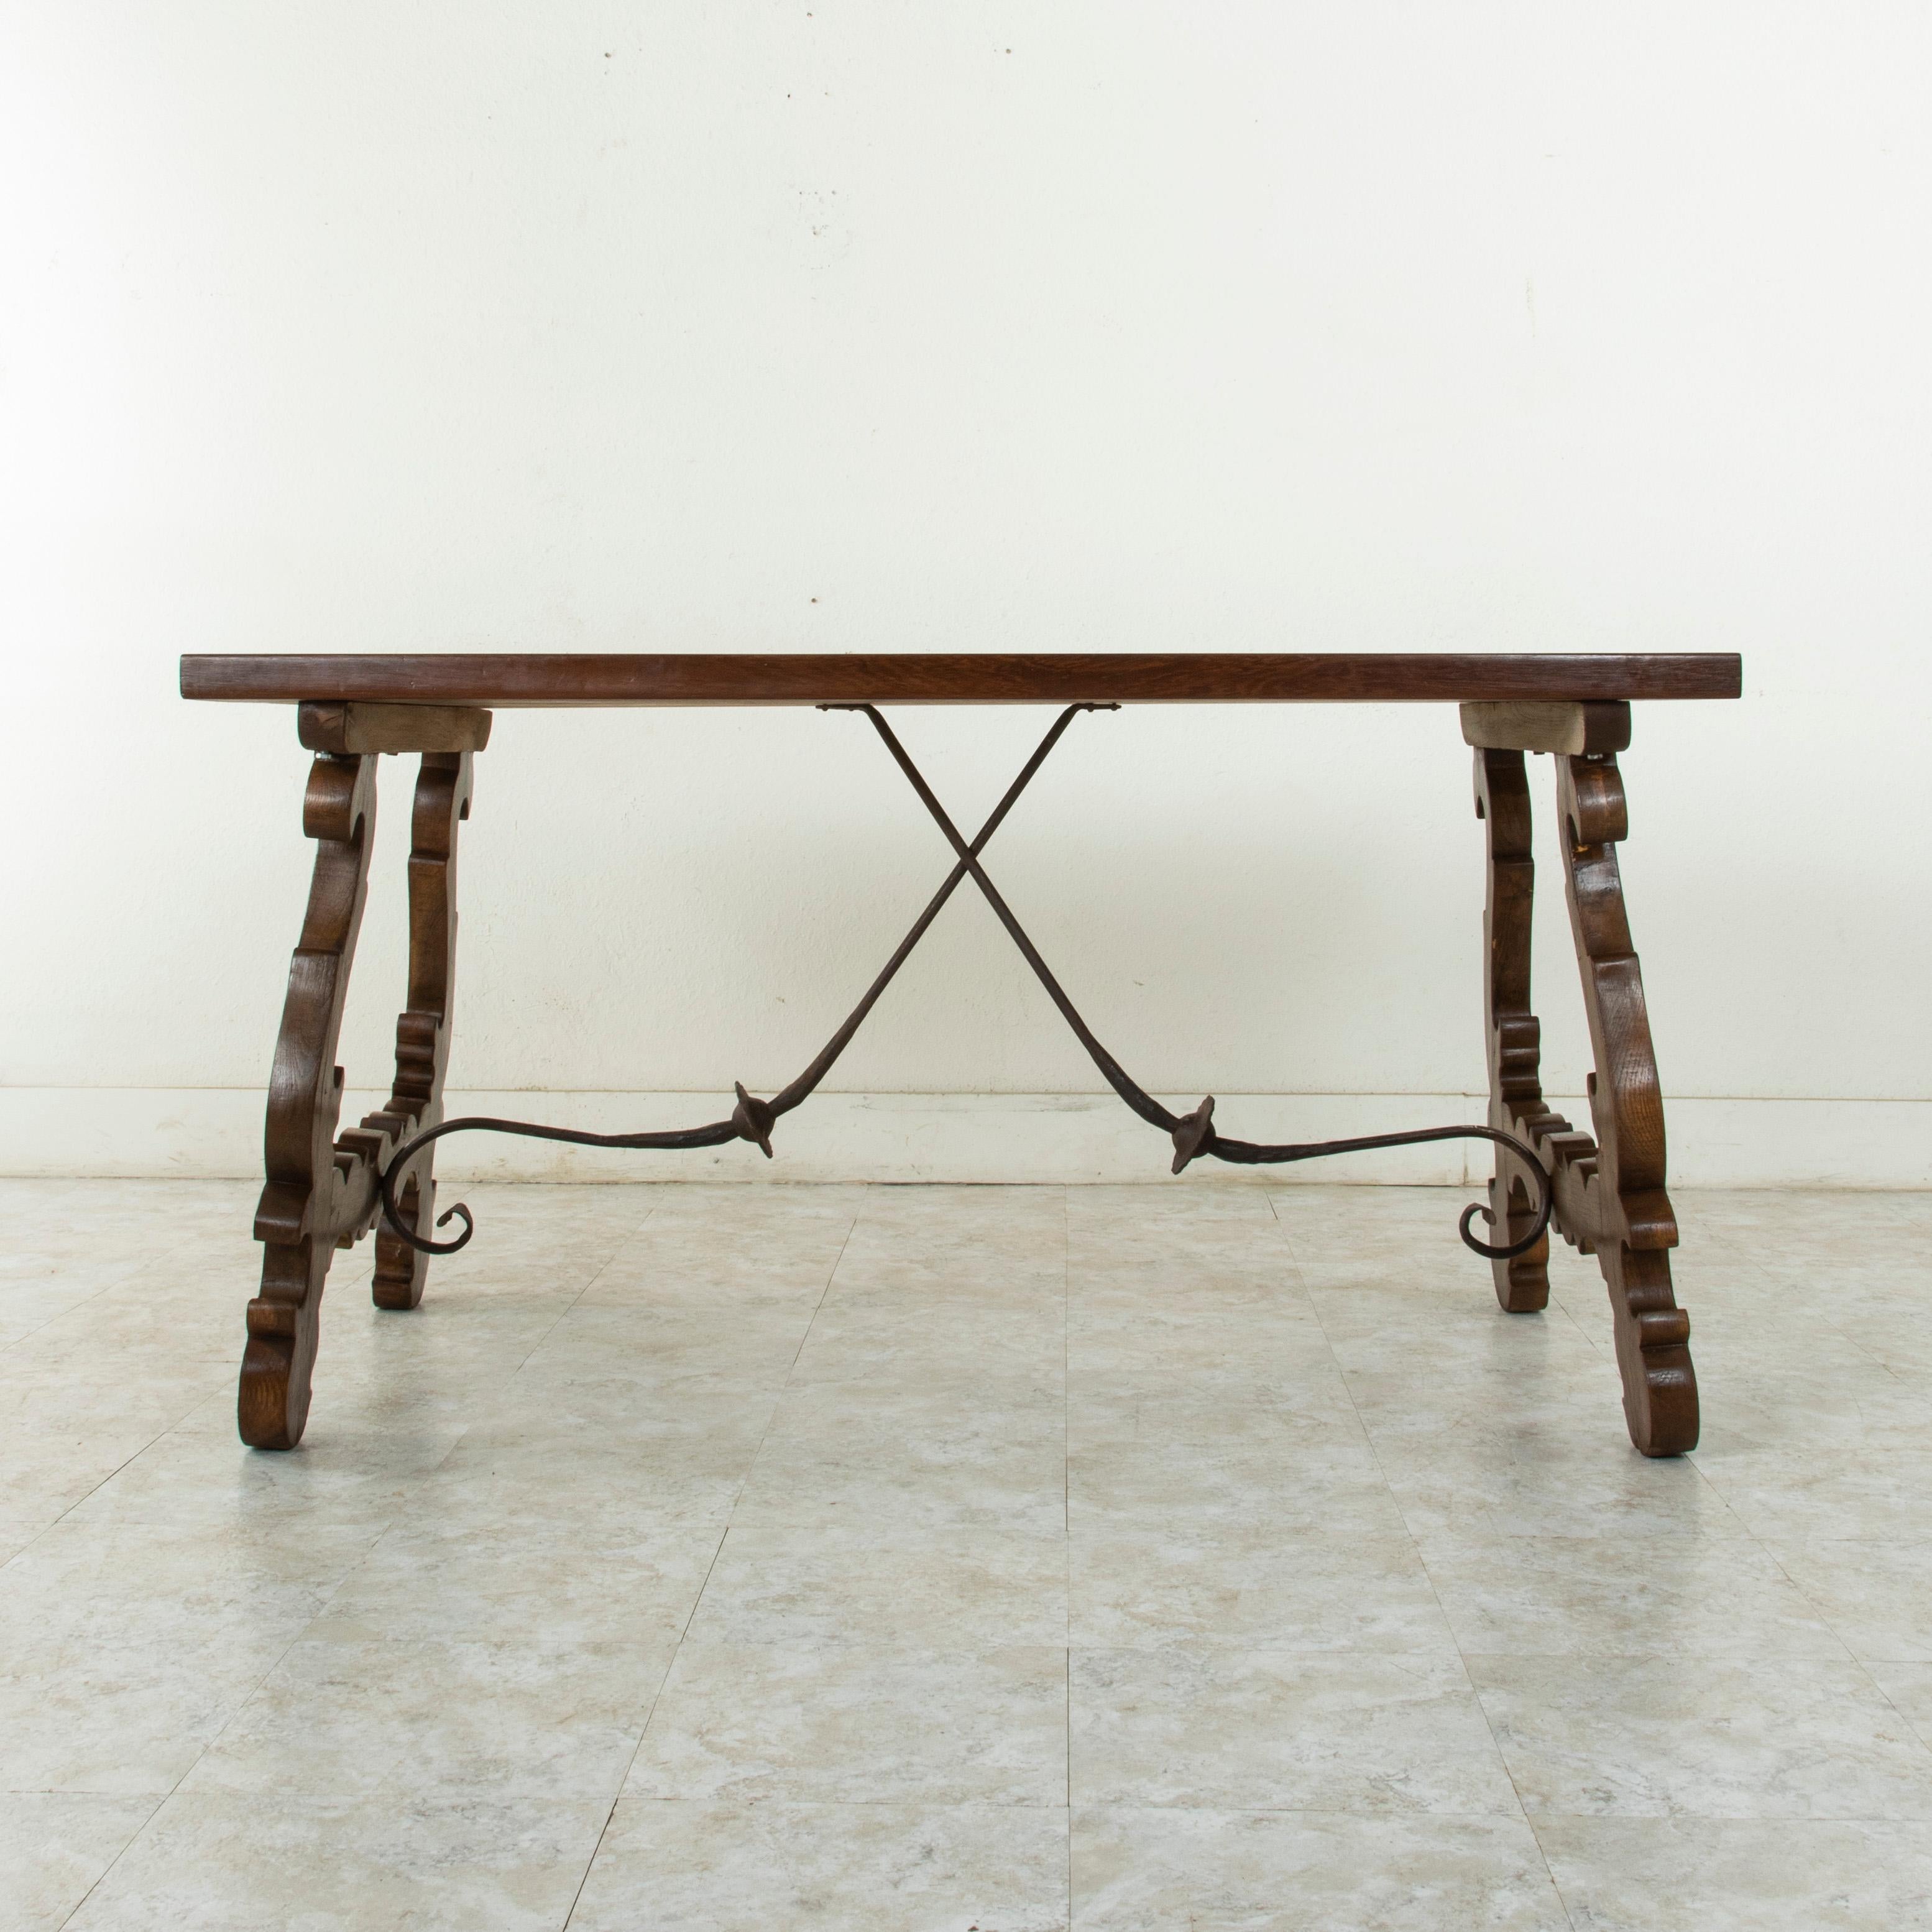 French Artisan-Made Spanish Renaissance Writing Table with Single Plank Amaranth Top